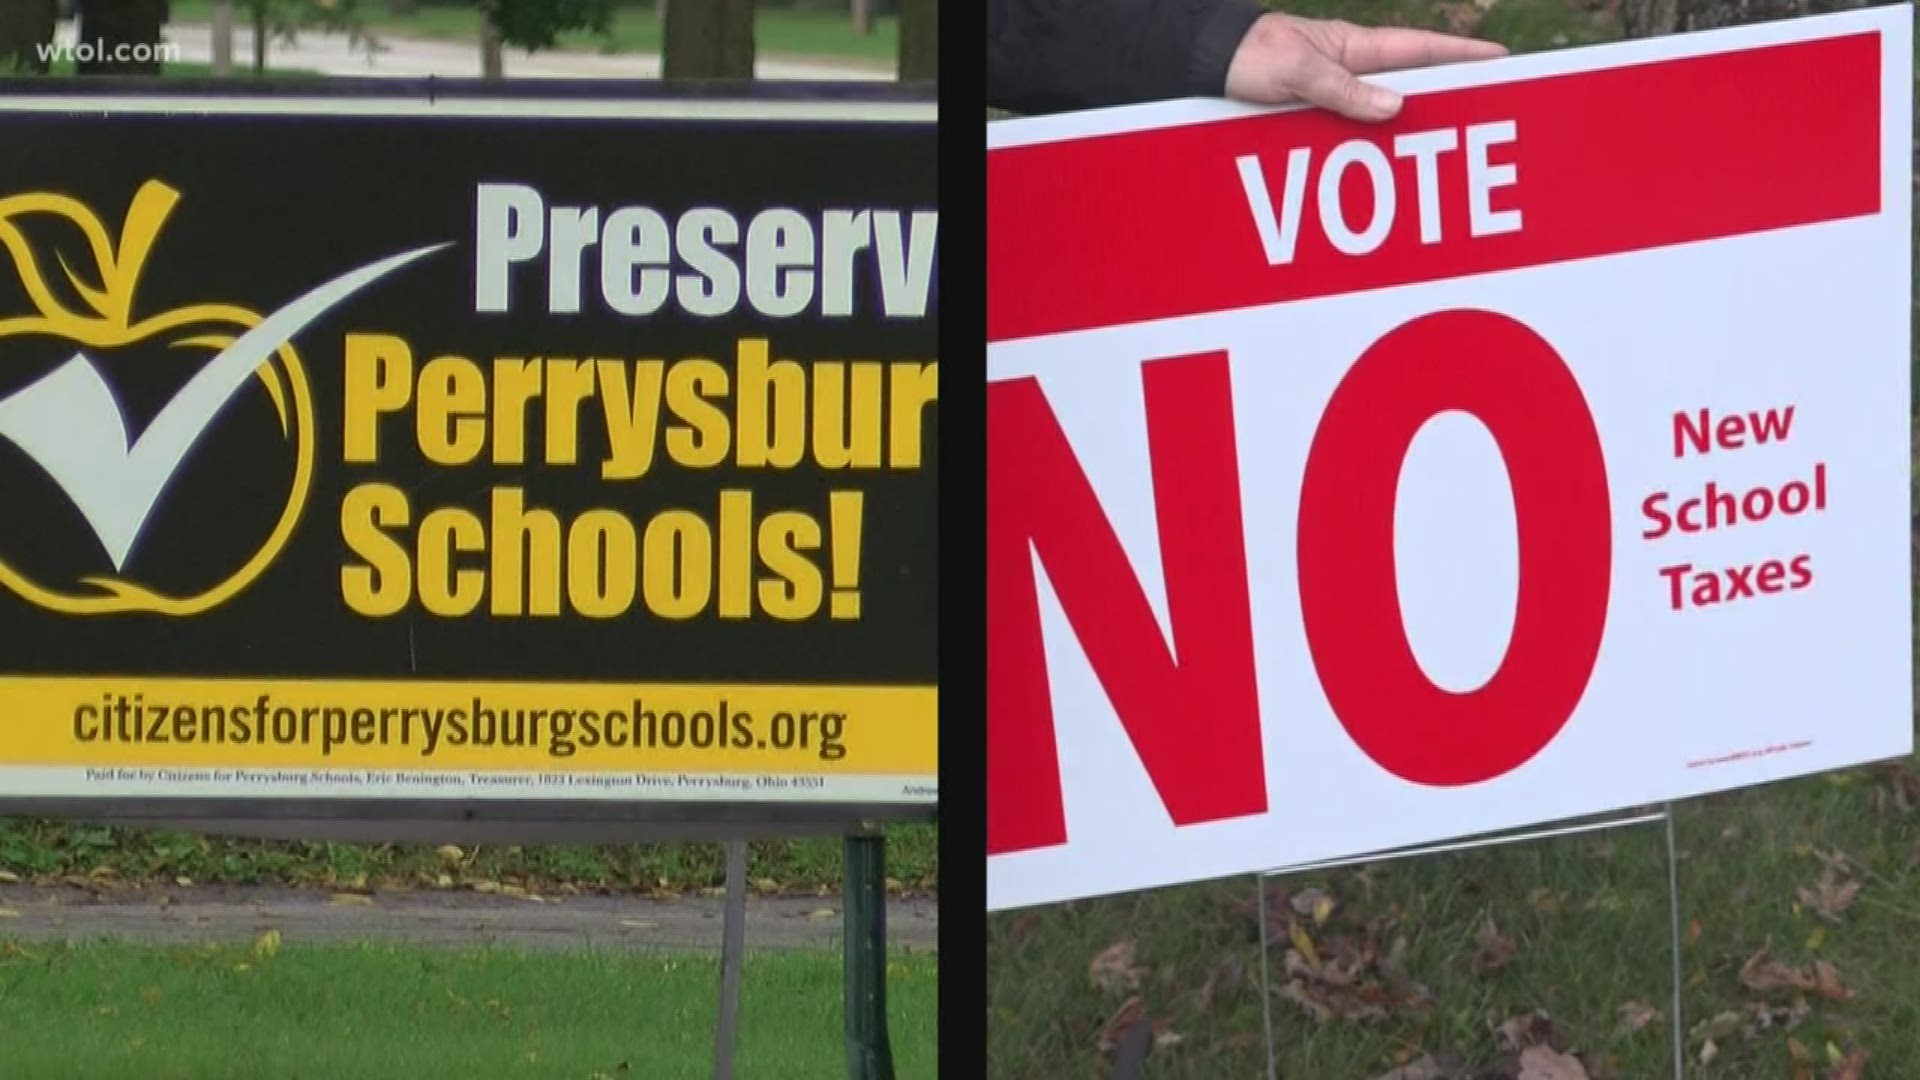 As election day approaches, Perrysburg's superintendent is pushing for passage on an operational levy. If it doesn't pass, major changes could soon be on the way.